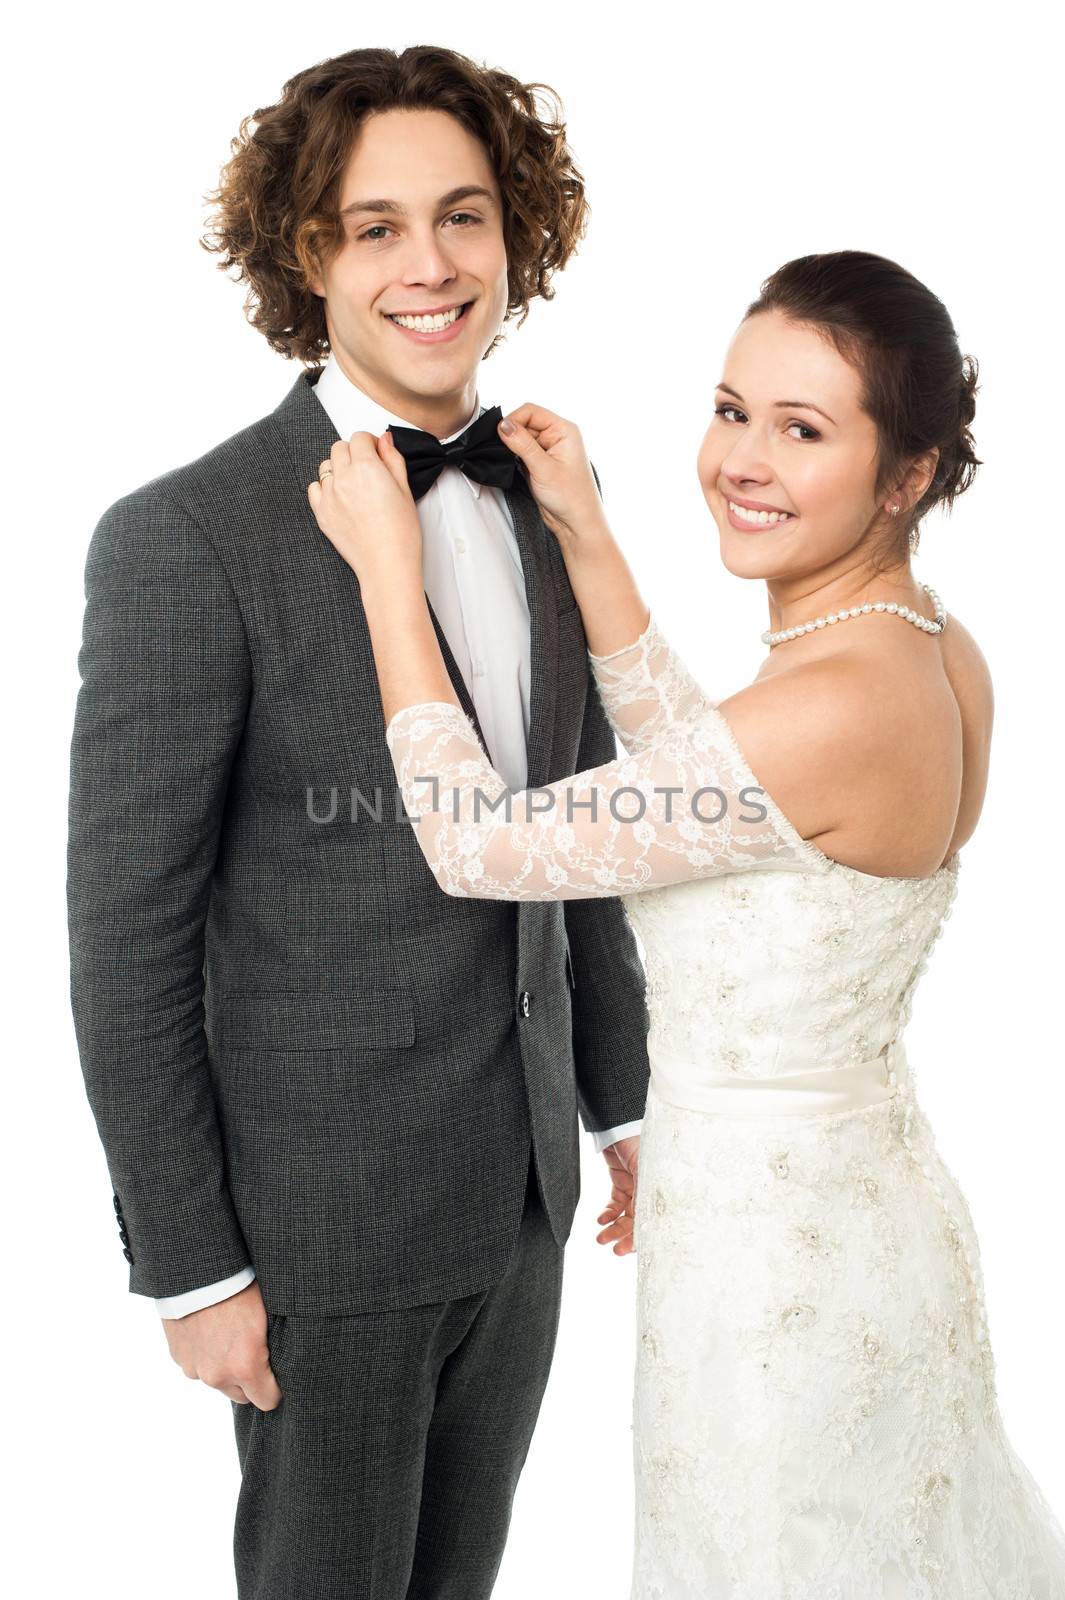 Glamorous young smiling bride adjusting the bowtie of a groom.